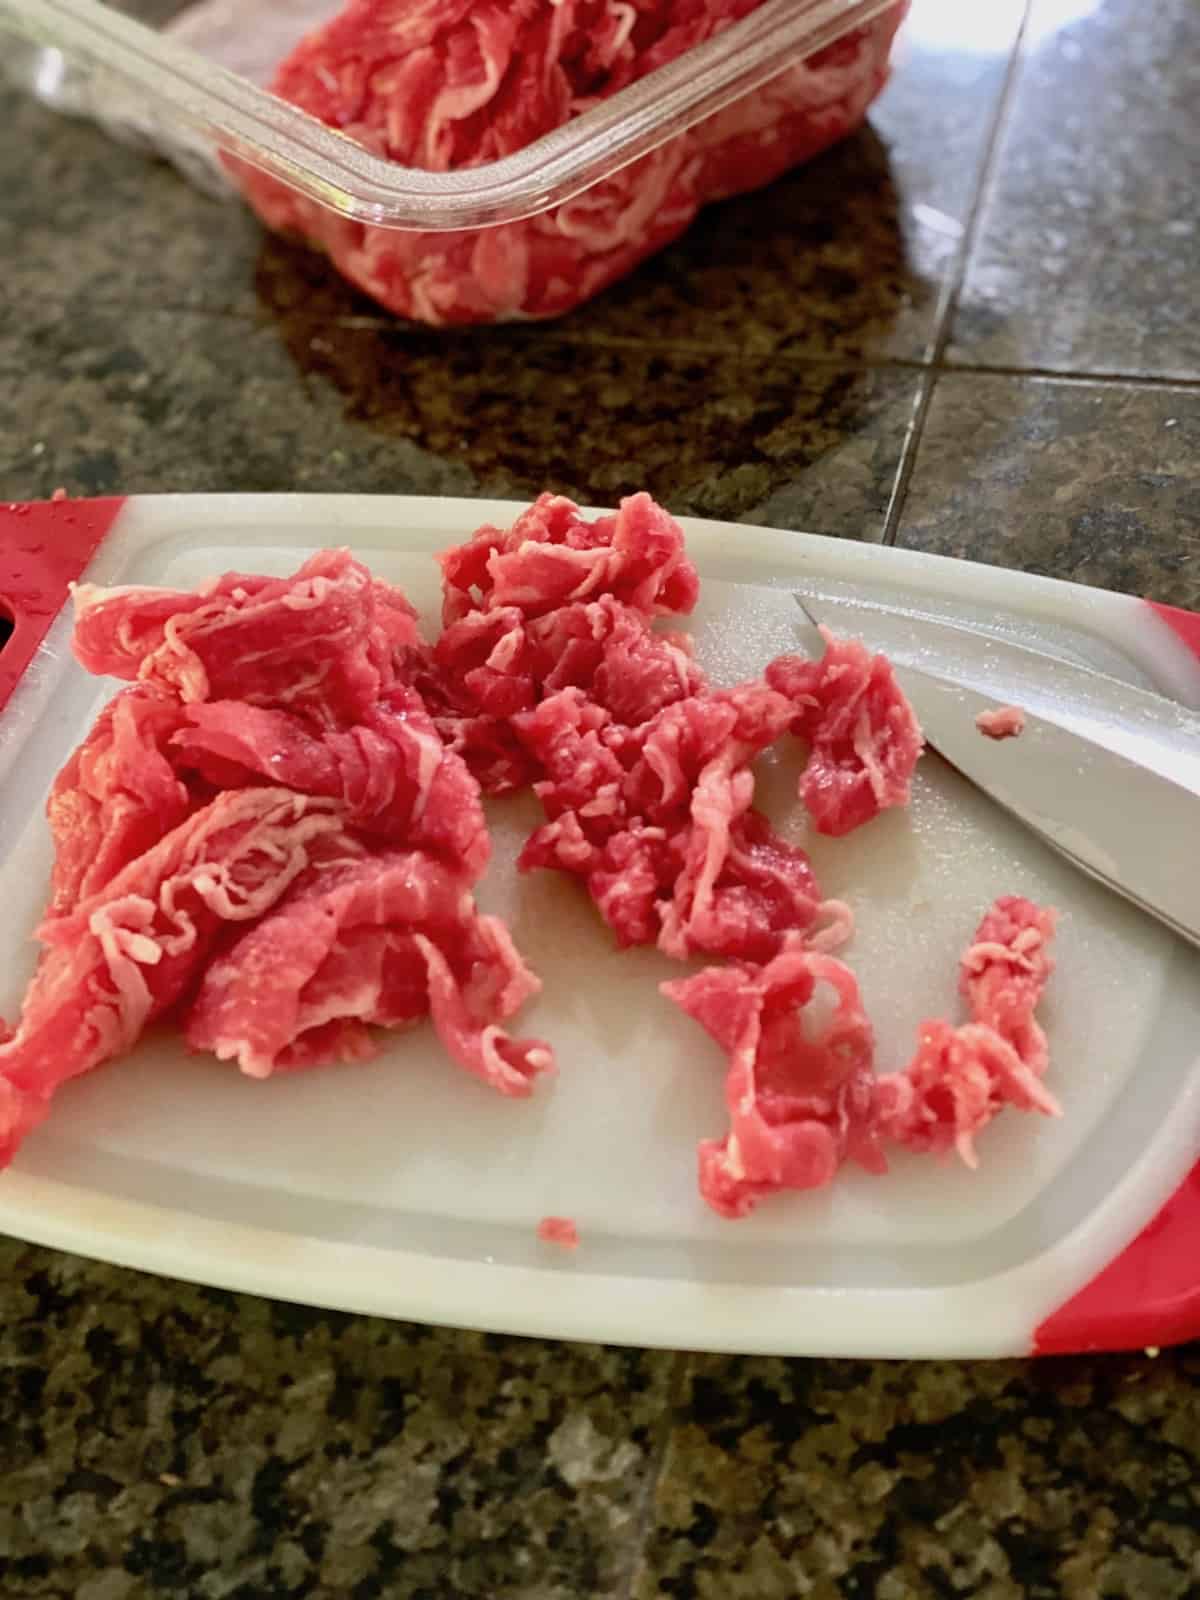 Cutting the shaved beef into smaller pieces on a cutting board.